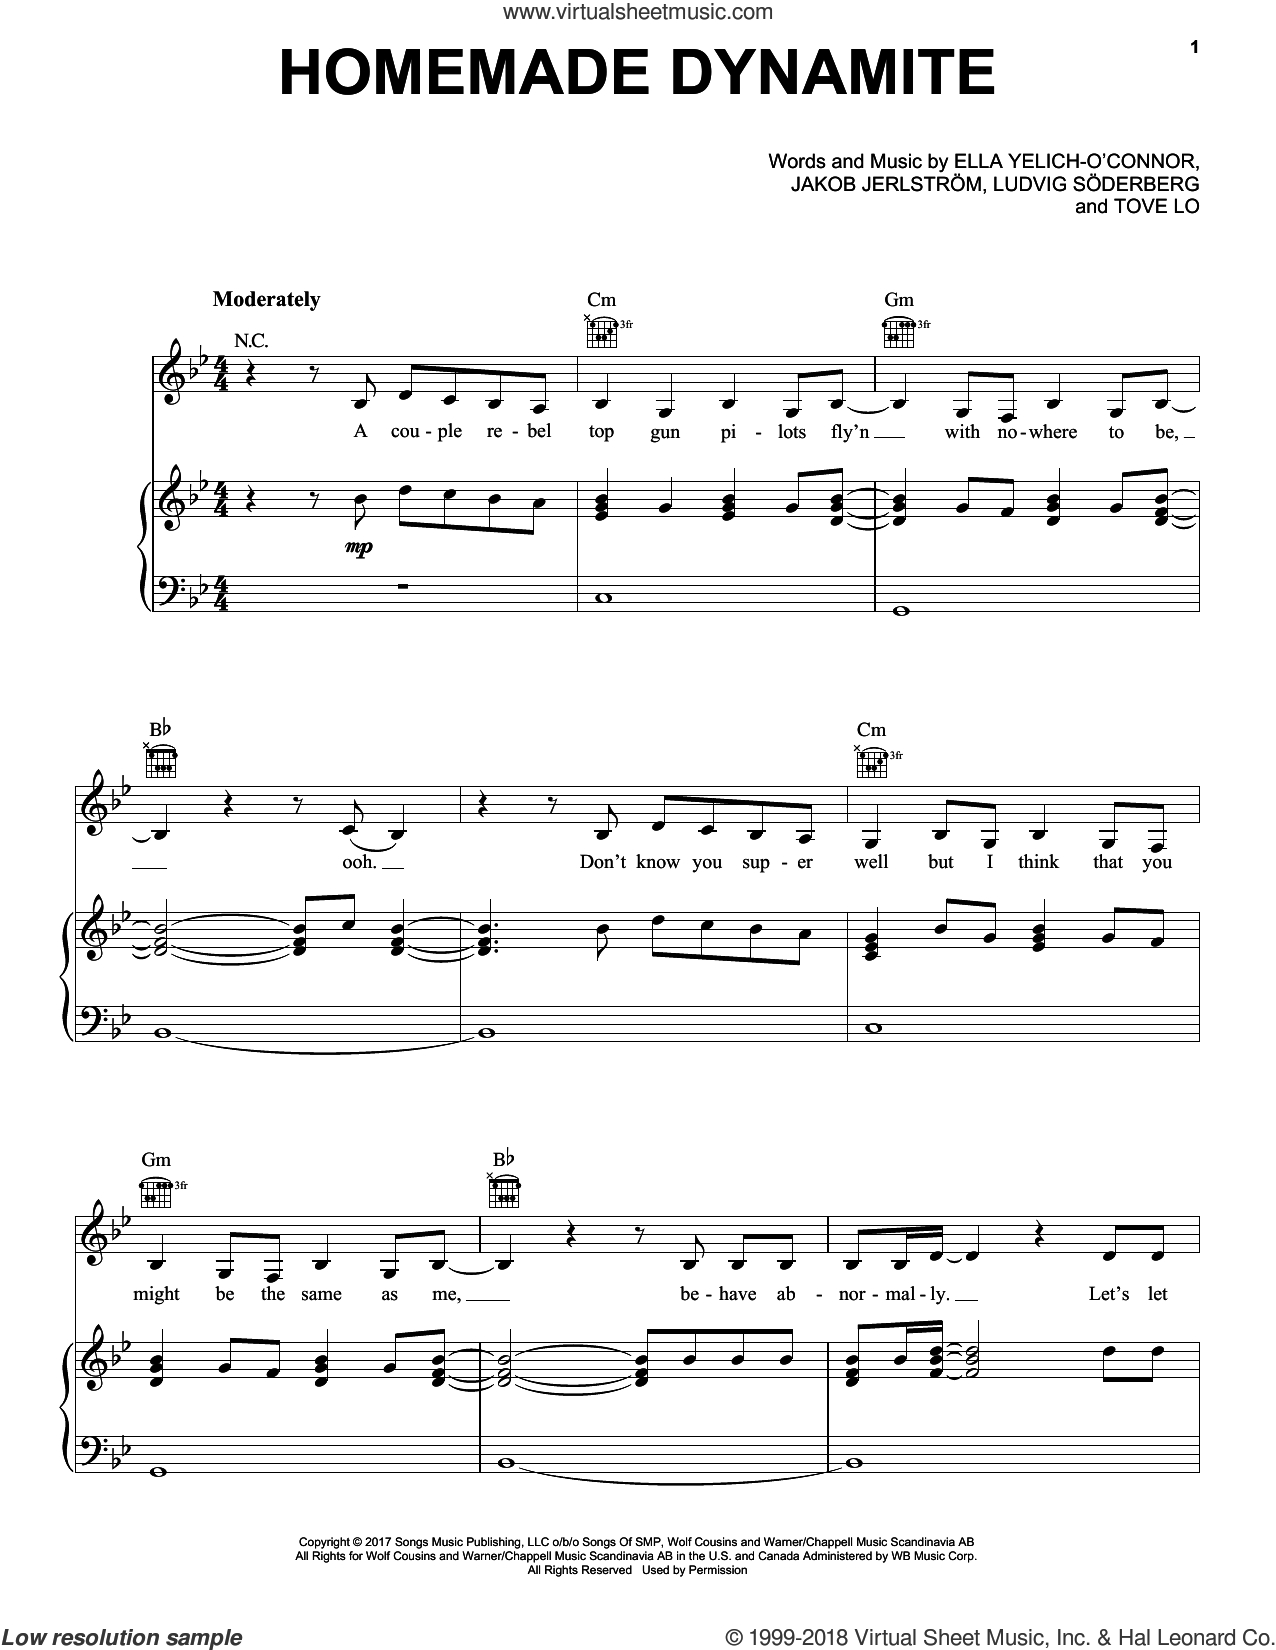 Lorde - Homemade Dynamite Sheet Music For Voice, Piano Or Guitar - Dynamite Piano Sheet Music Free Printable